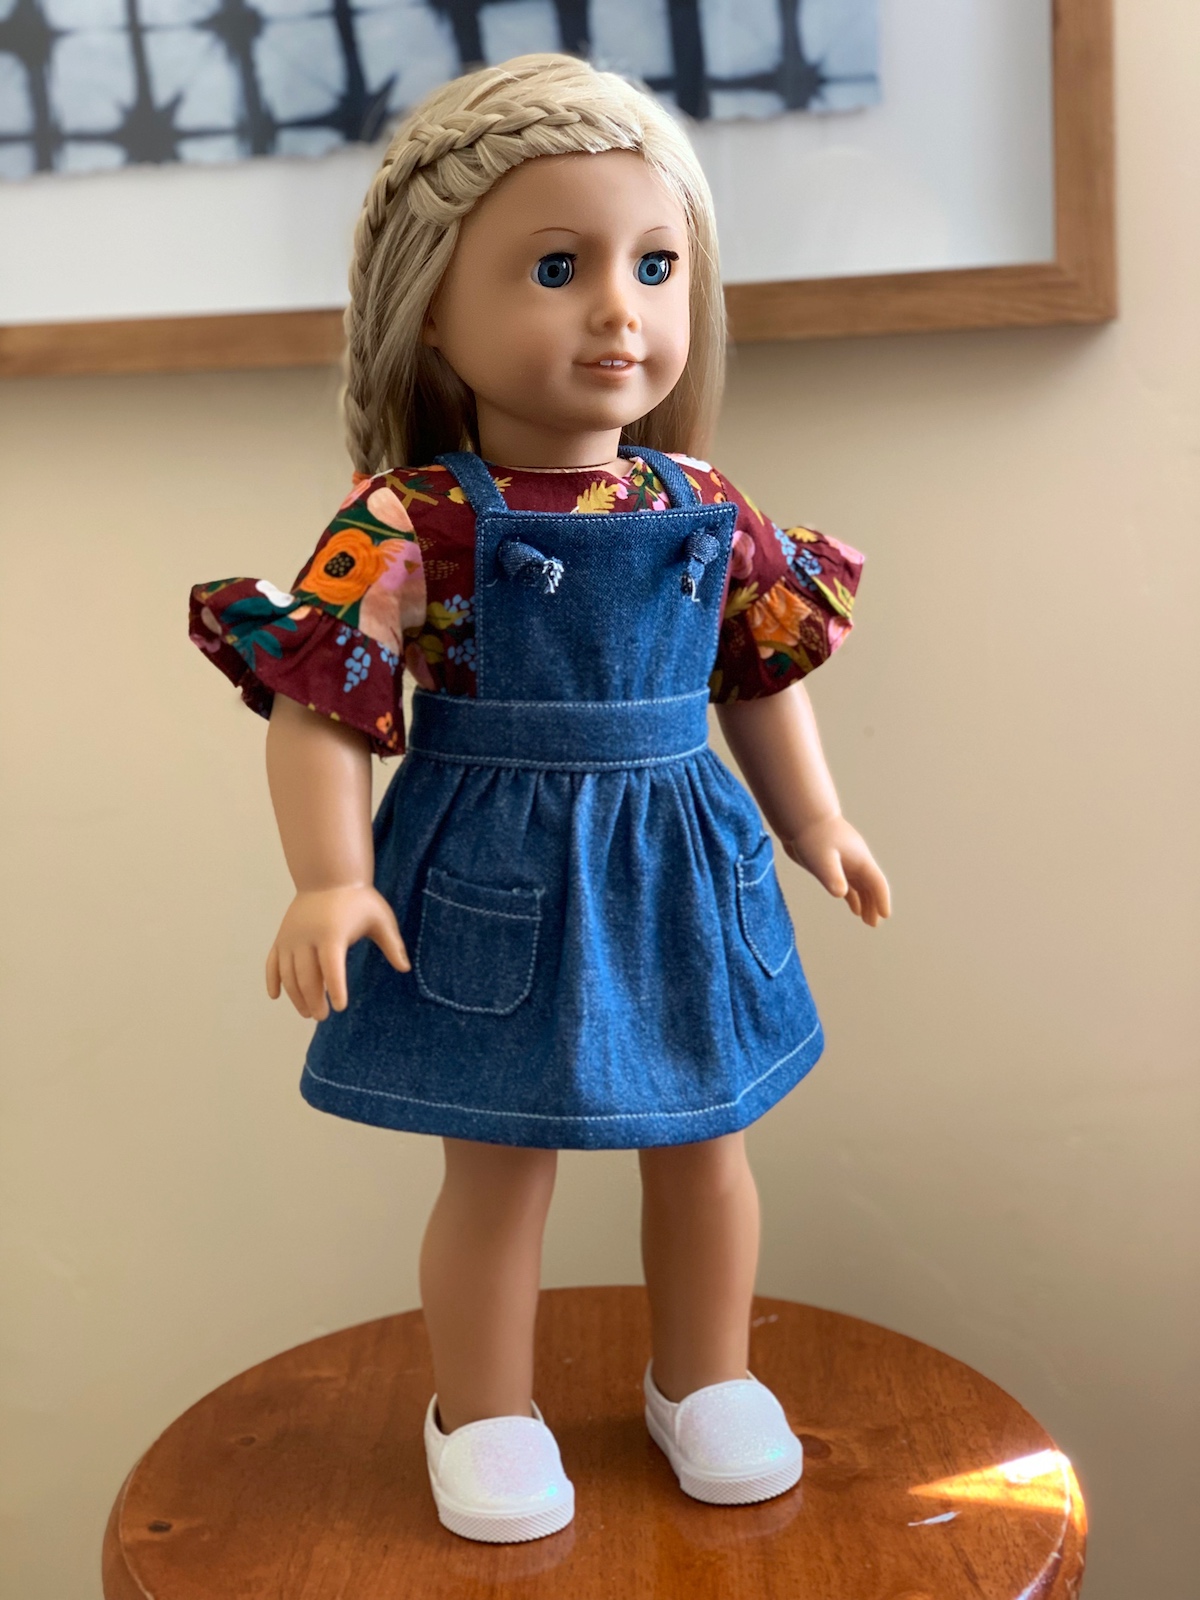 How to make 18-inch doll clothes no sew?